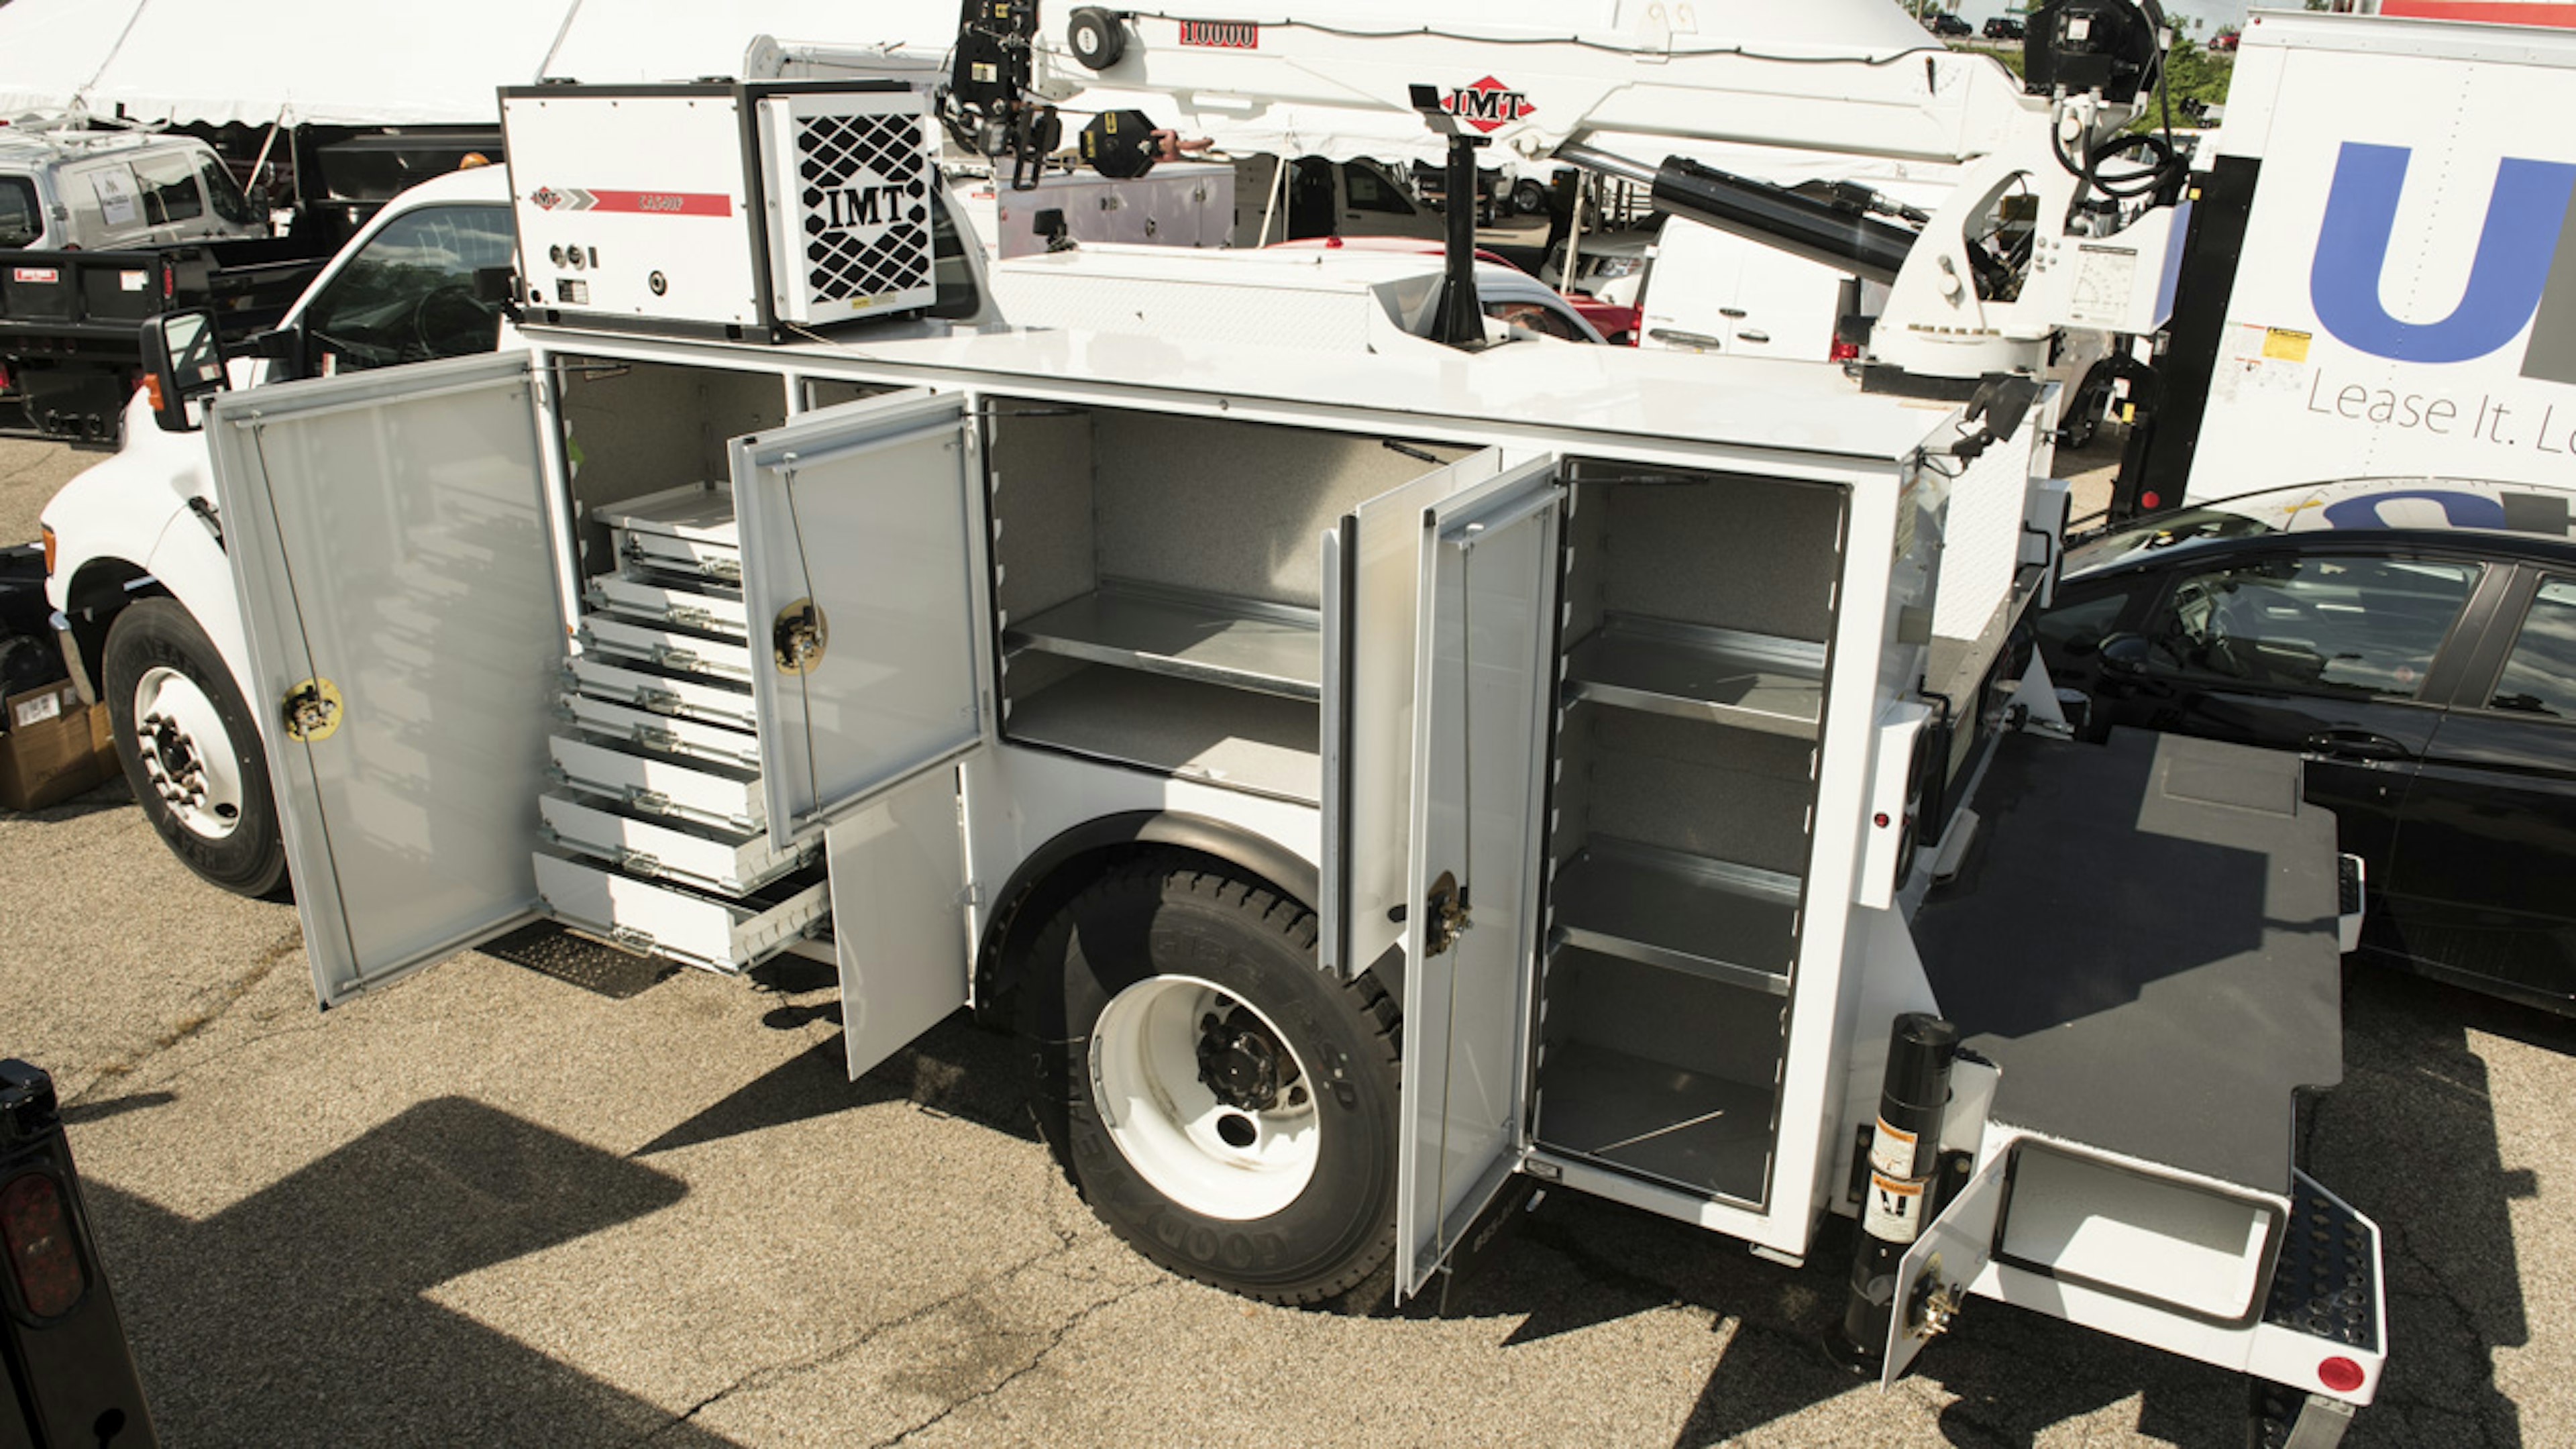 utility accessories such as tool boxes and generator on the back of a medium service truck